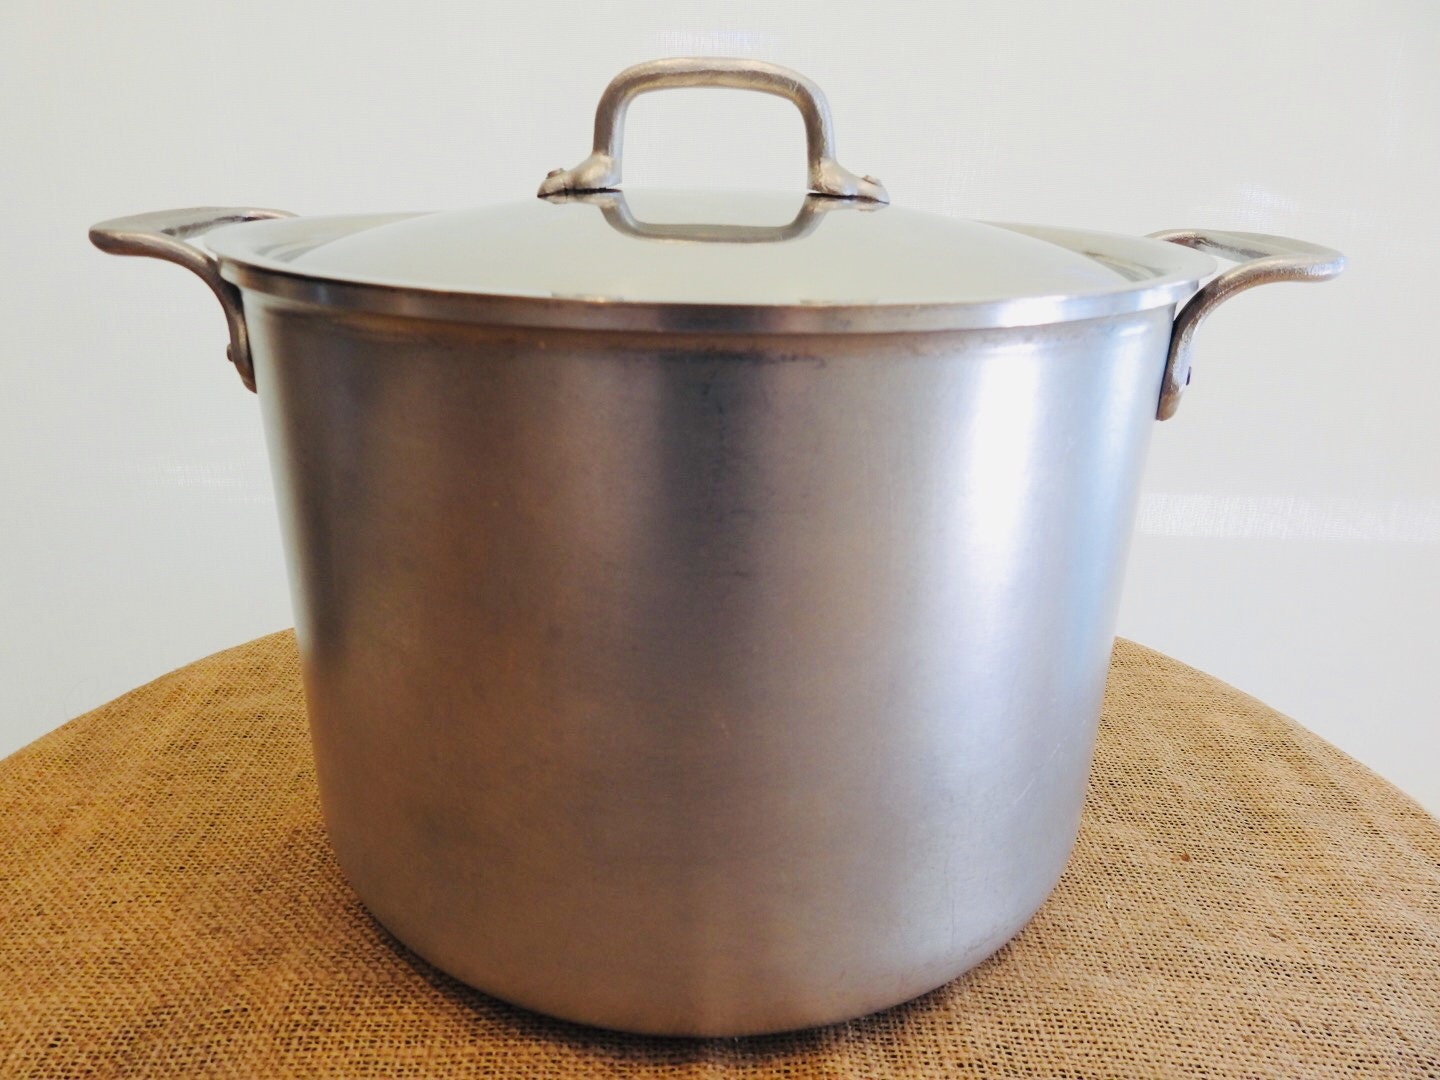 All-Clad Stainless Steel Multi-Cooker - 12 qt